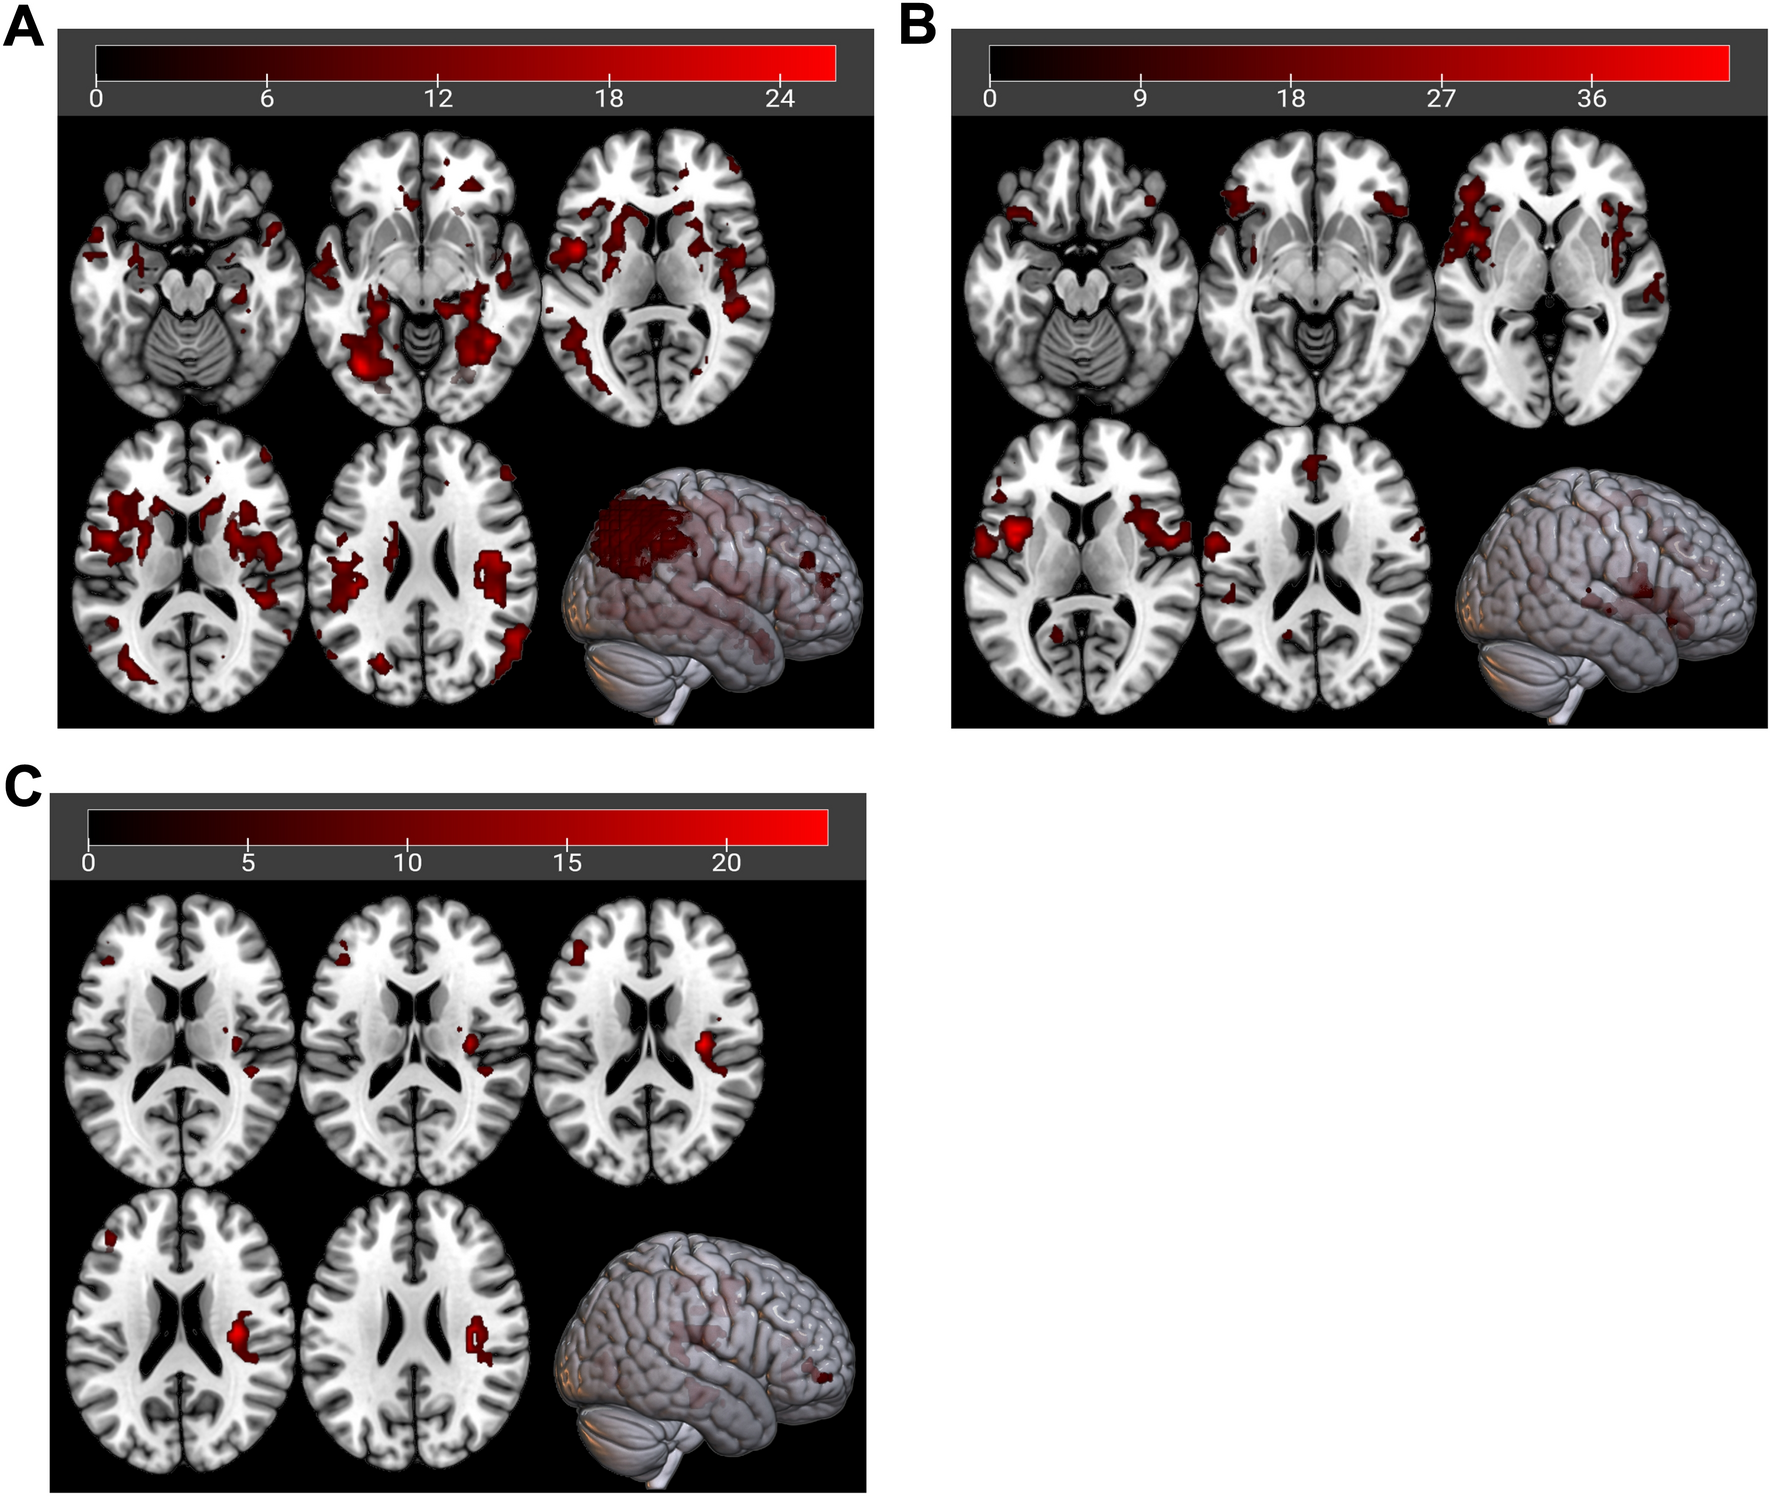 Sex differences in anhedonia in bipolar depression: a resting-state fMRI study